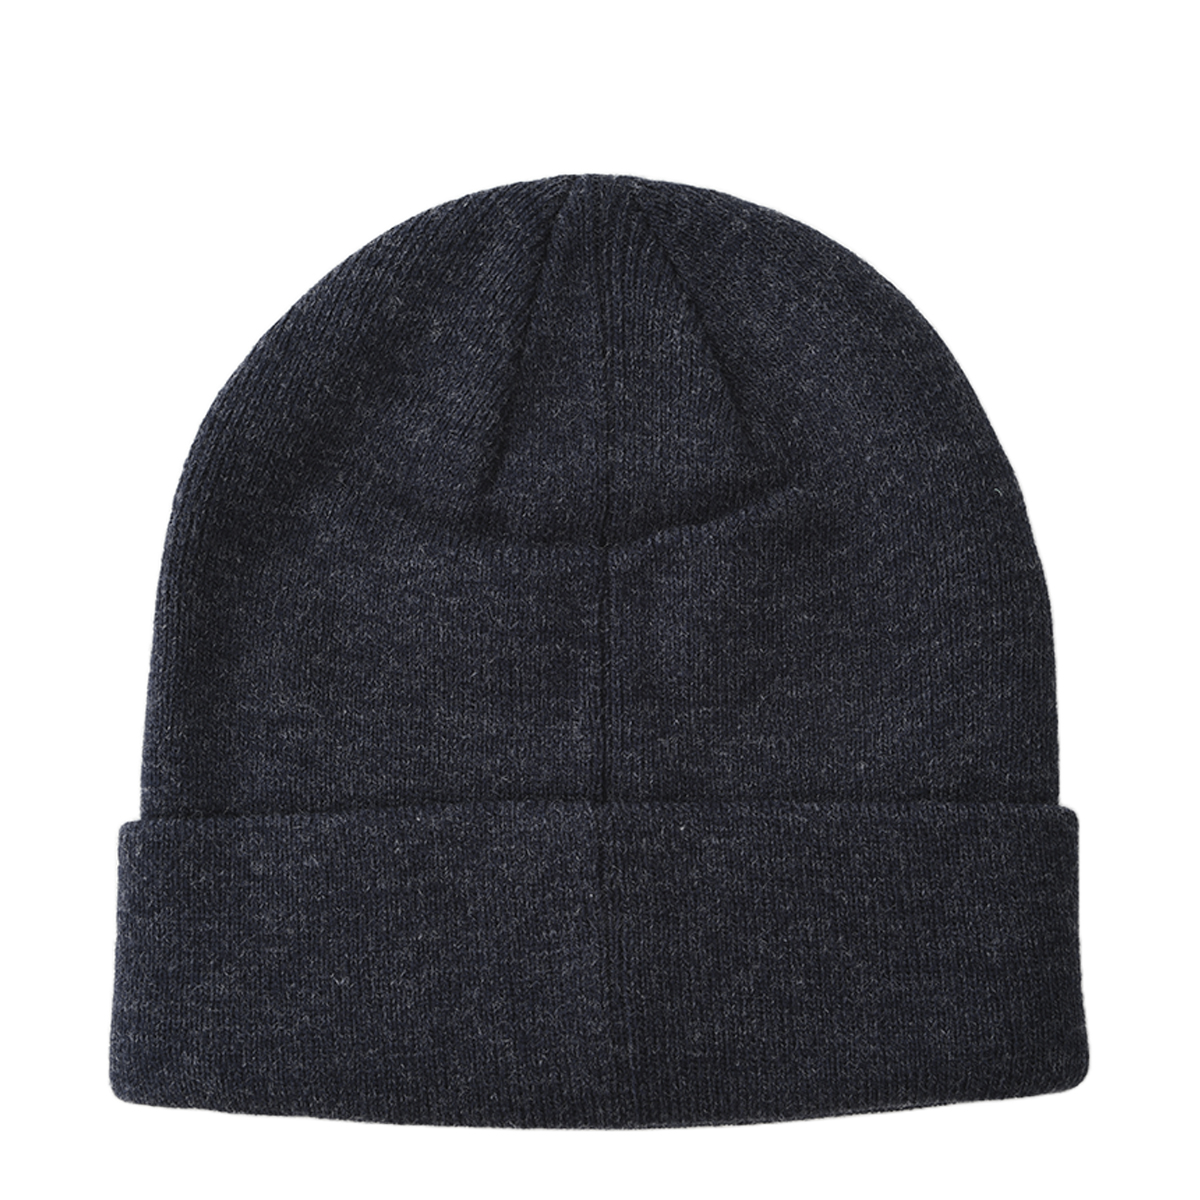 Gorro Puma Archive Heather Beanie,  image number null